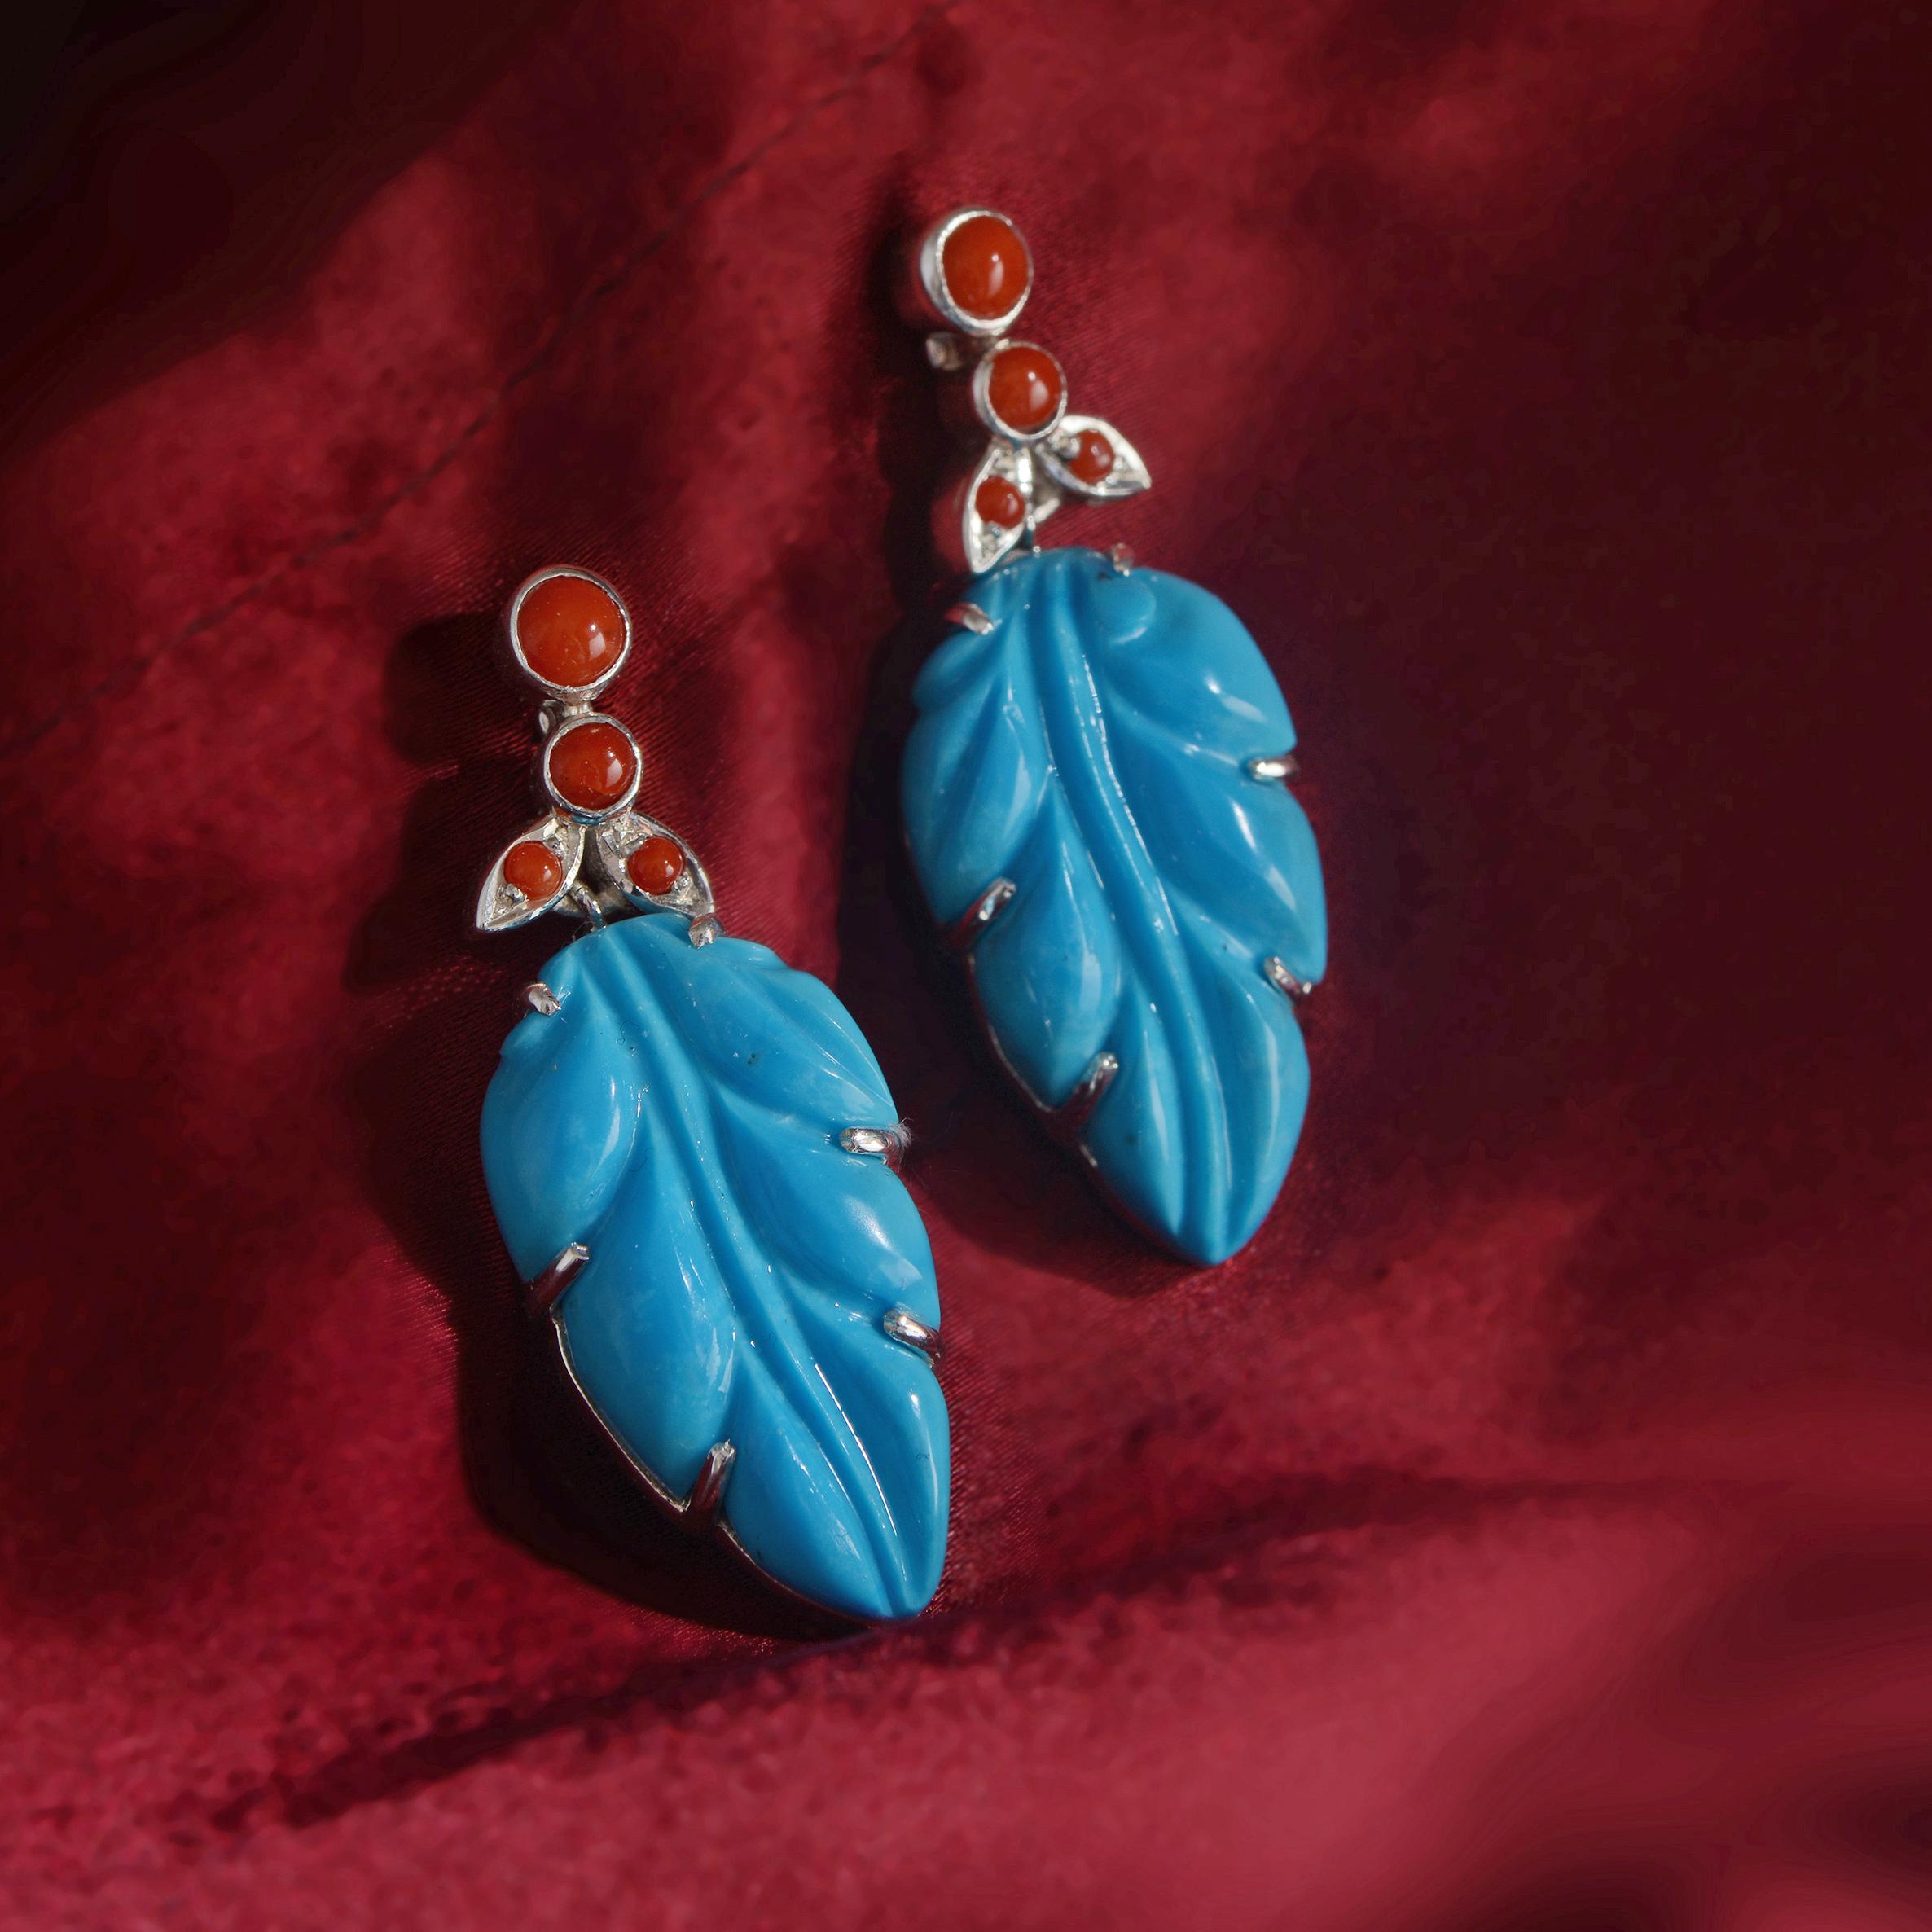 Using the ancient art of stone-carving these stunning one-of-a-kind turquoise earrings, have been handmade in our workshops. The turquoise has been hand-carved into the shape of a leaf and then hand-engraved and embedded with red corals. These